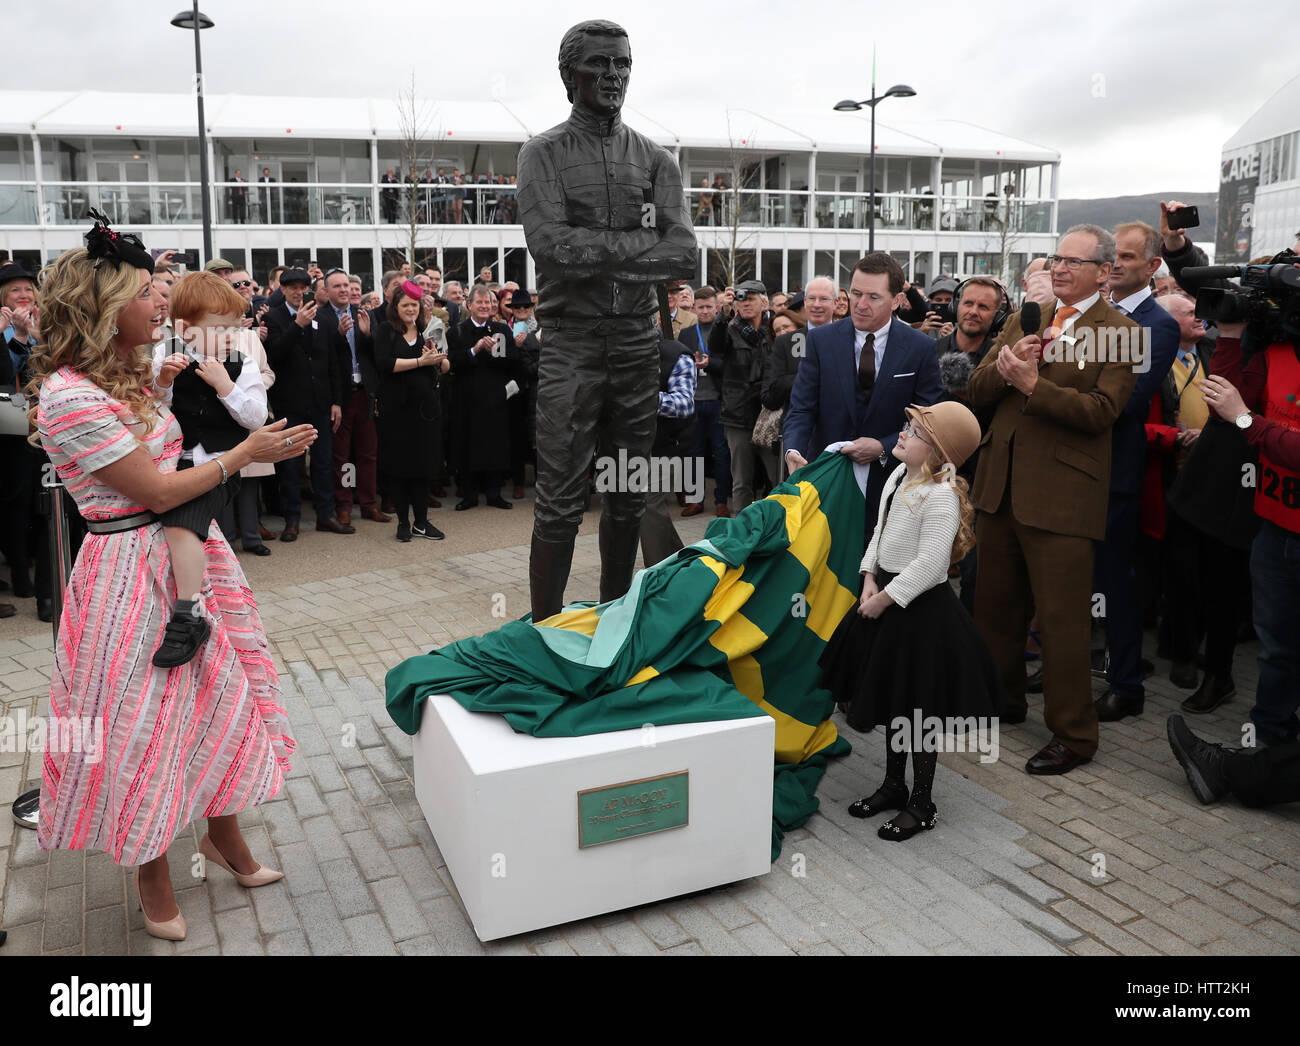 AP McCoy unveils a statue of himself during Champion Day of the 2017 Cheltenham Festival at Cheltenham Racecourse. PRESS ASSOCIATION Photo. Picture date: Tuesday March 14, 2017. See PA story RACING Cheltenham. Photo credit should read: David Davies/PA Wire. Stock Photo